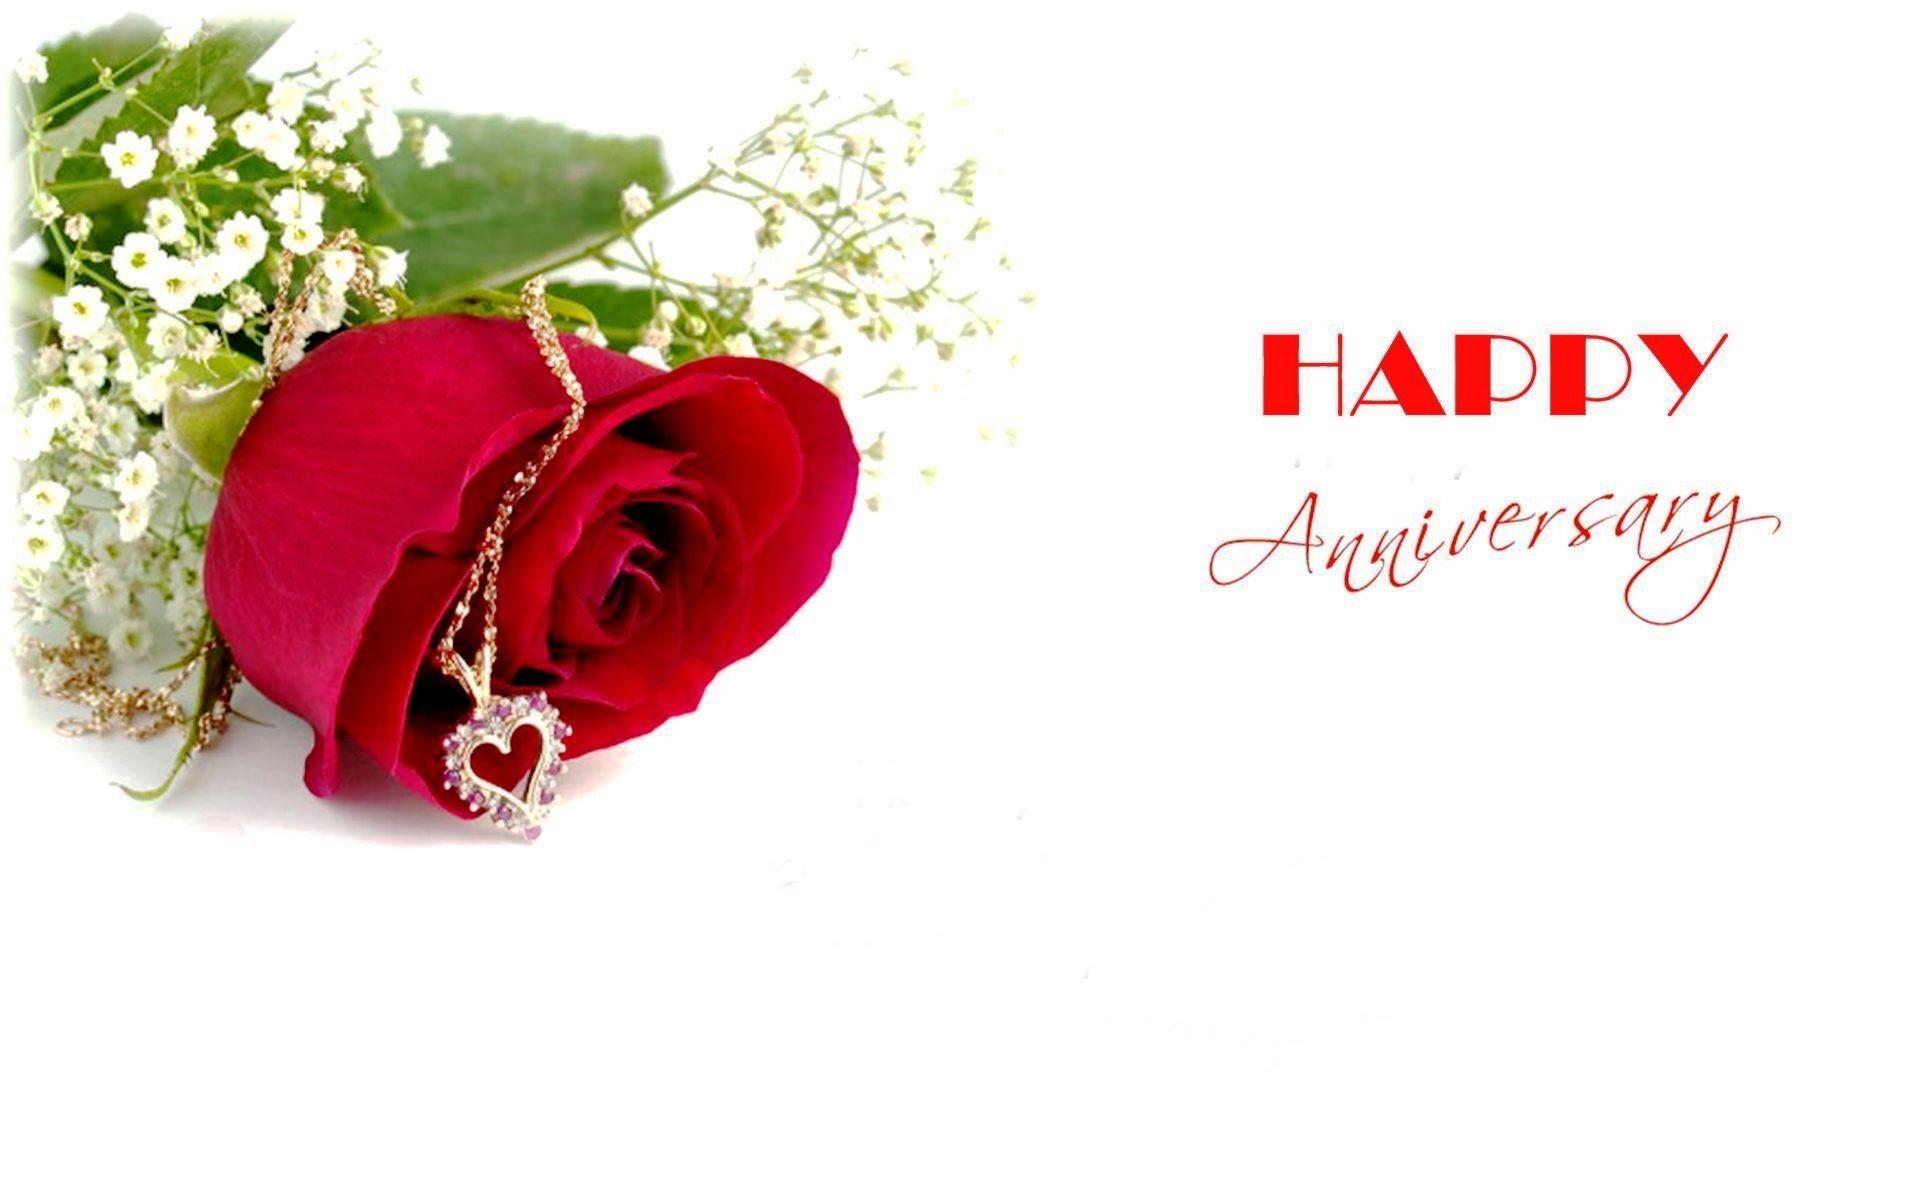 Happy marriage anniversary wishes HD wallpaperNew HD wallpaper